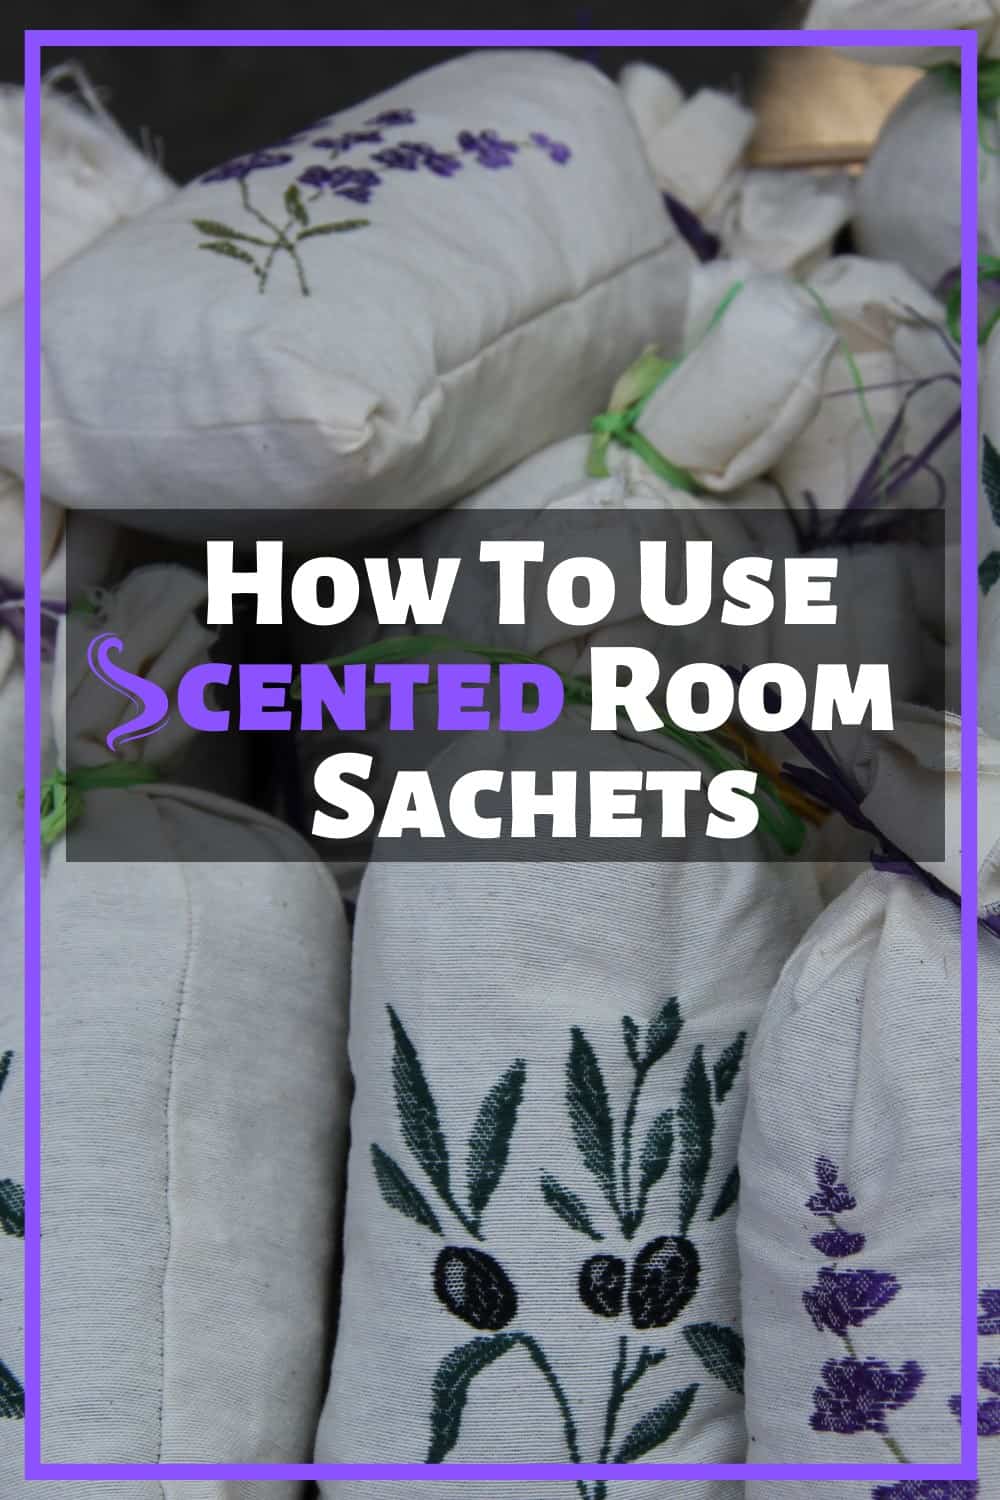 Use scented room sachets to make your home smell nice